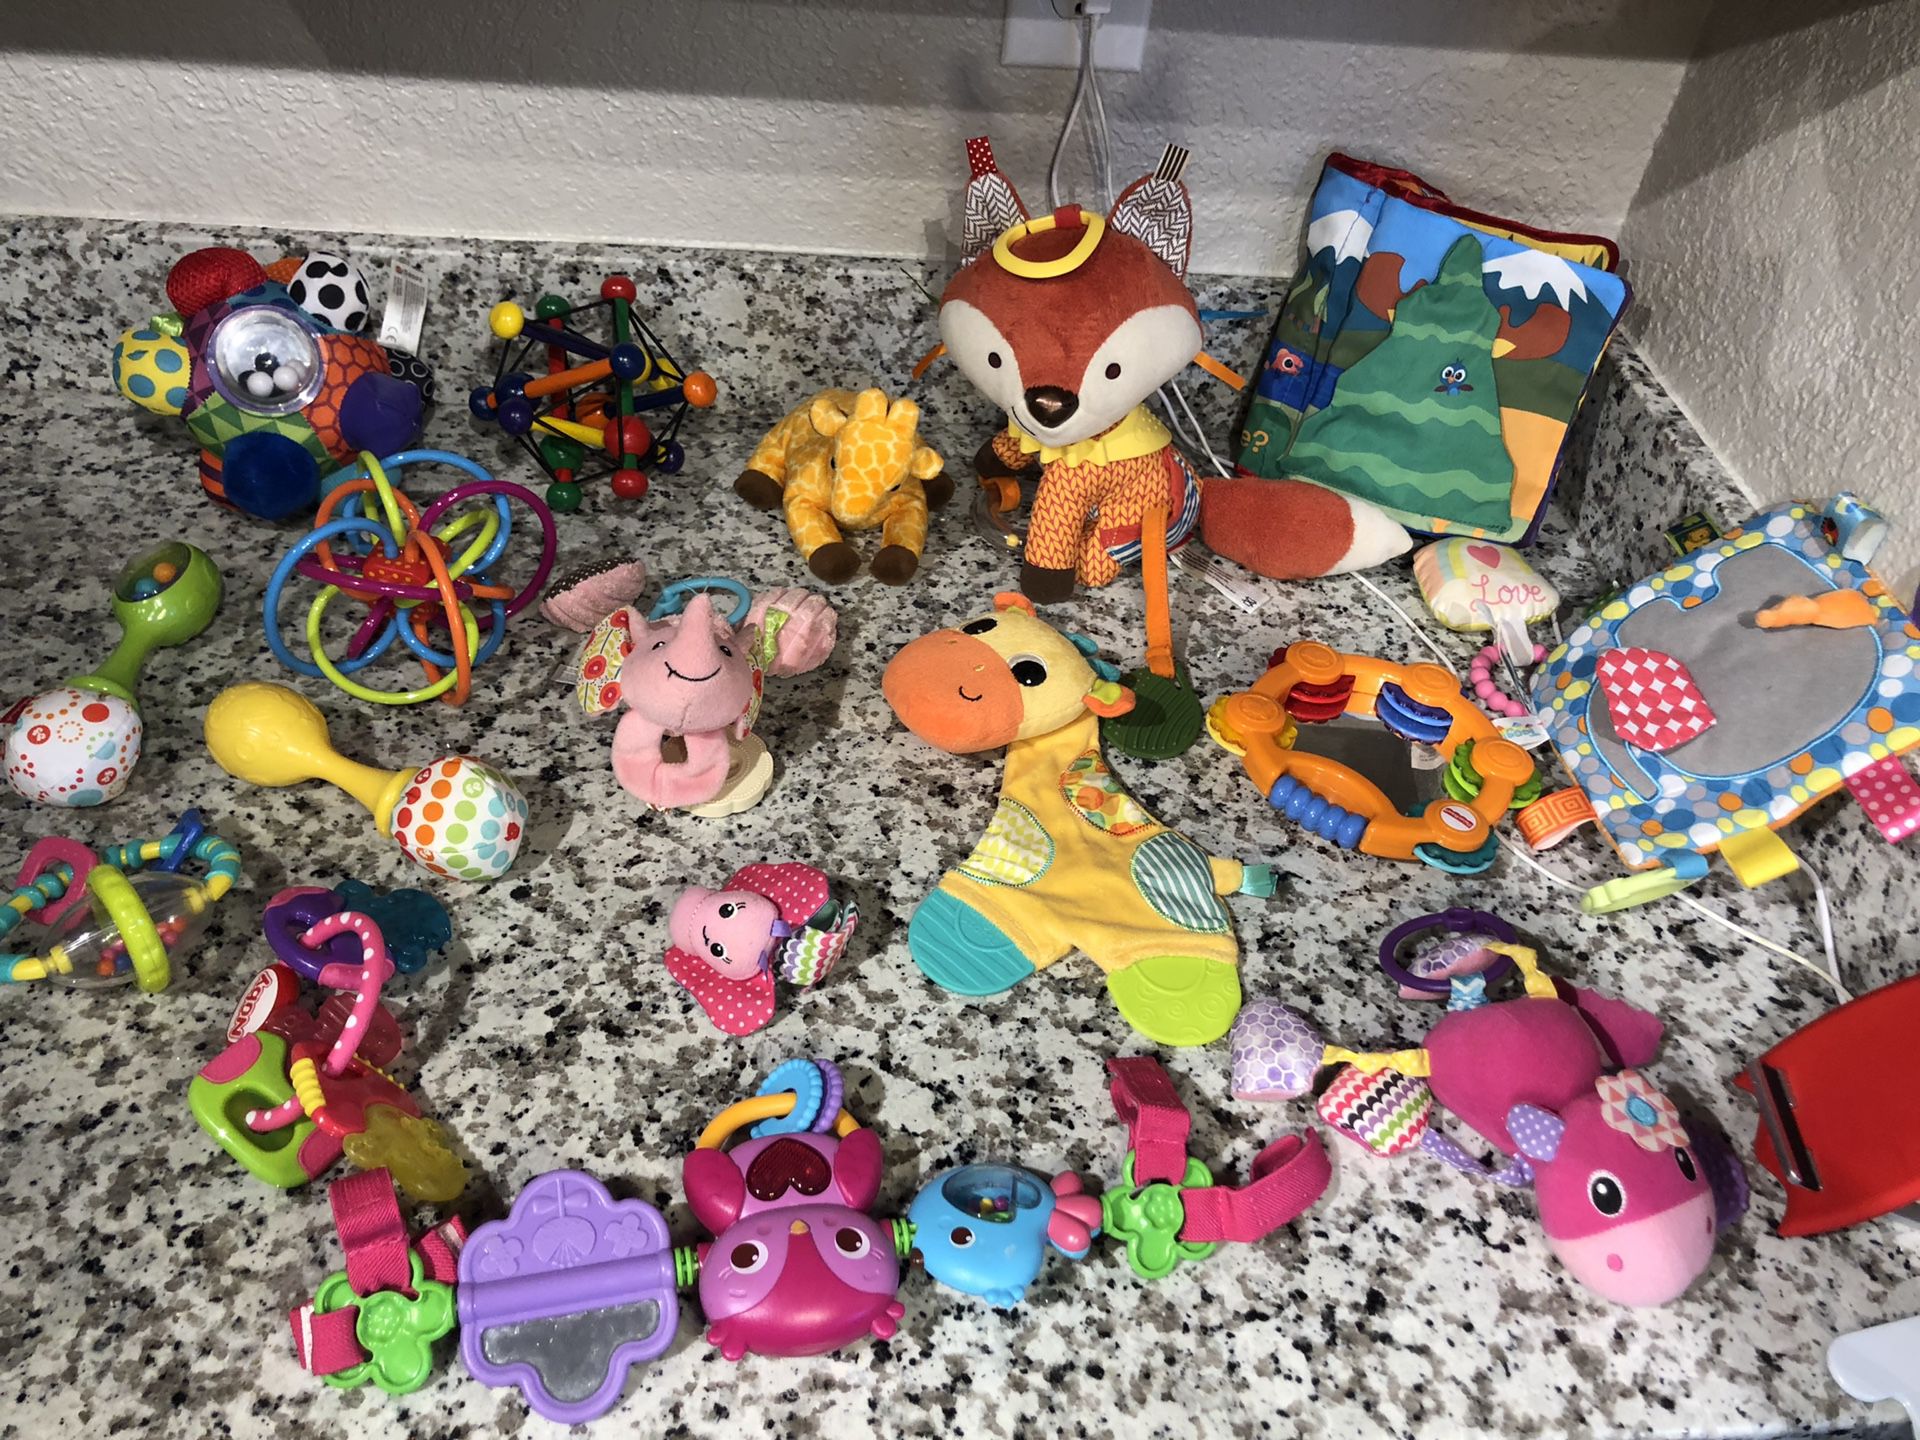 Variety of infant and baby toys. Stroller toy as well